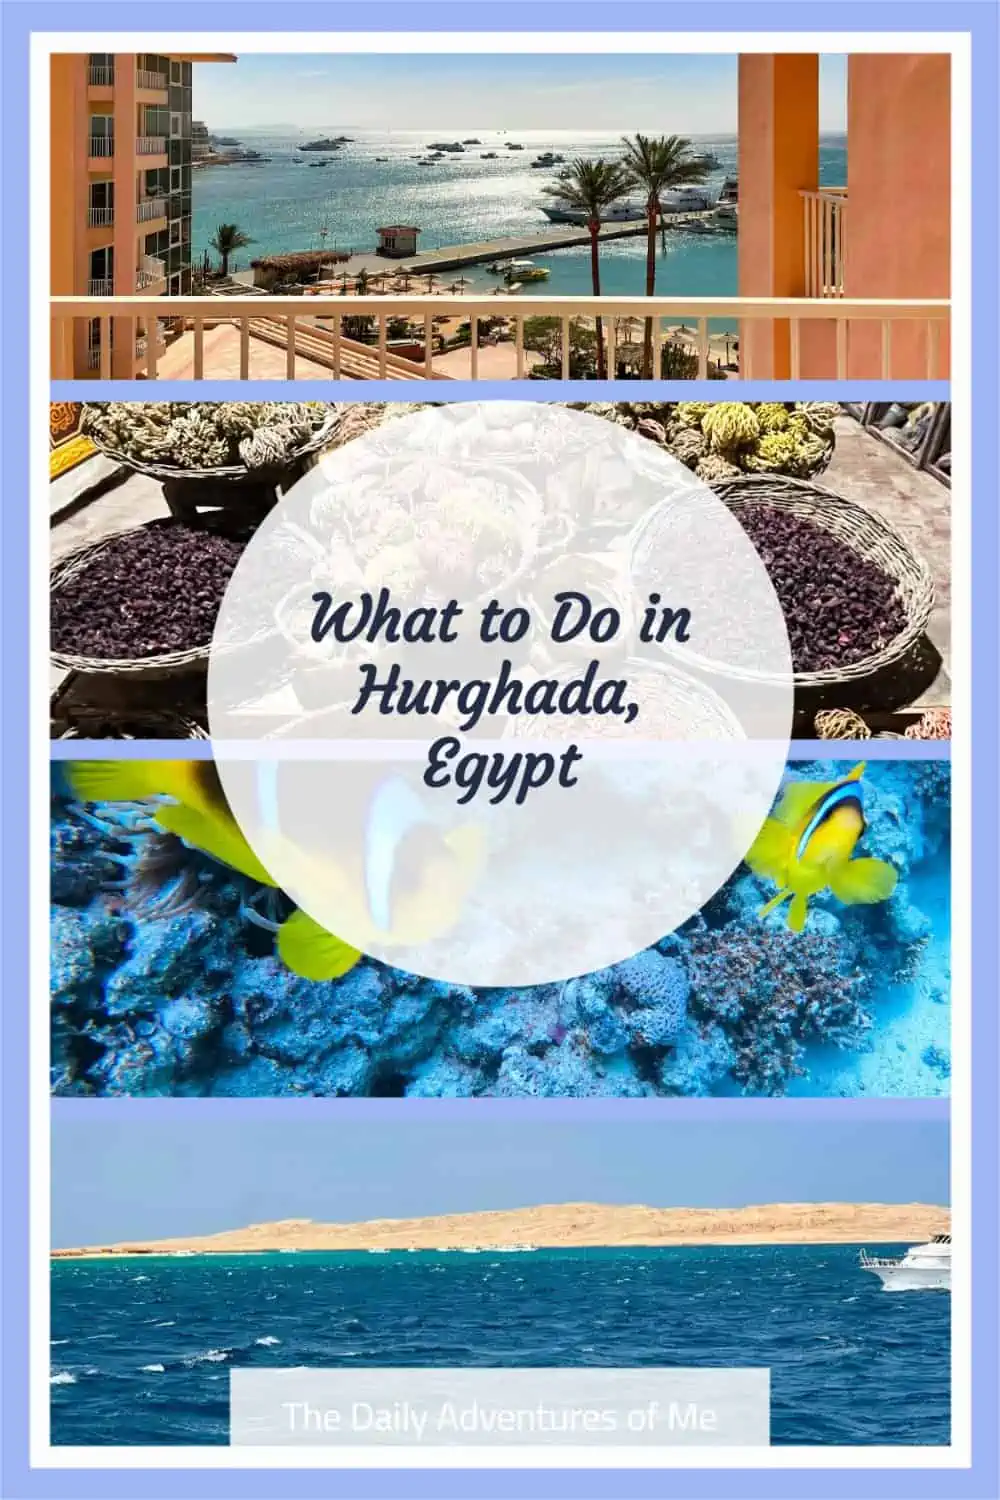 Hurghada, Egypt is a large town sitting on the coast of the Red Sea, but it is not only a place to sit on the beach. Read on for the possibilities of a trip to Hurghada. #egypttravel #visitEgypt